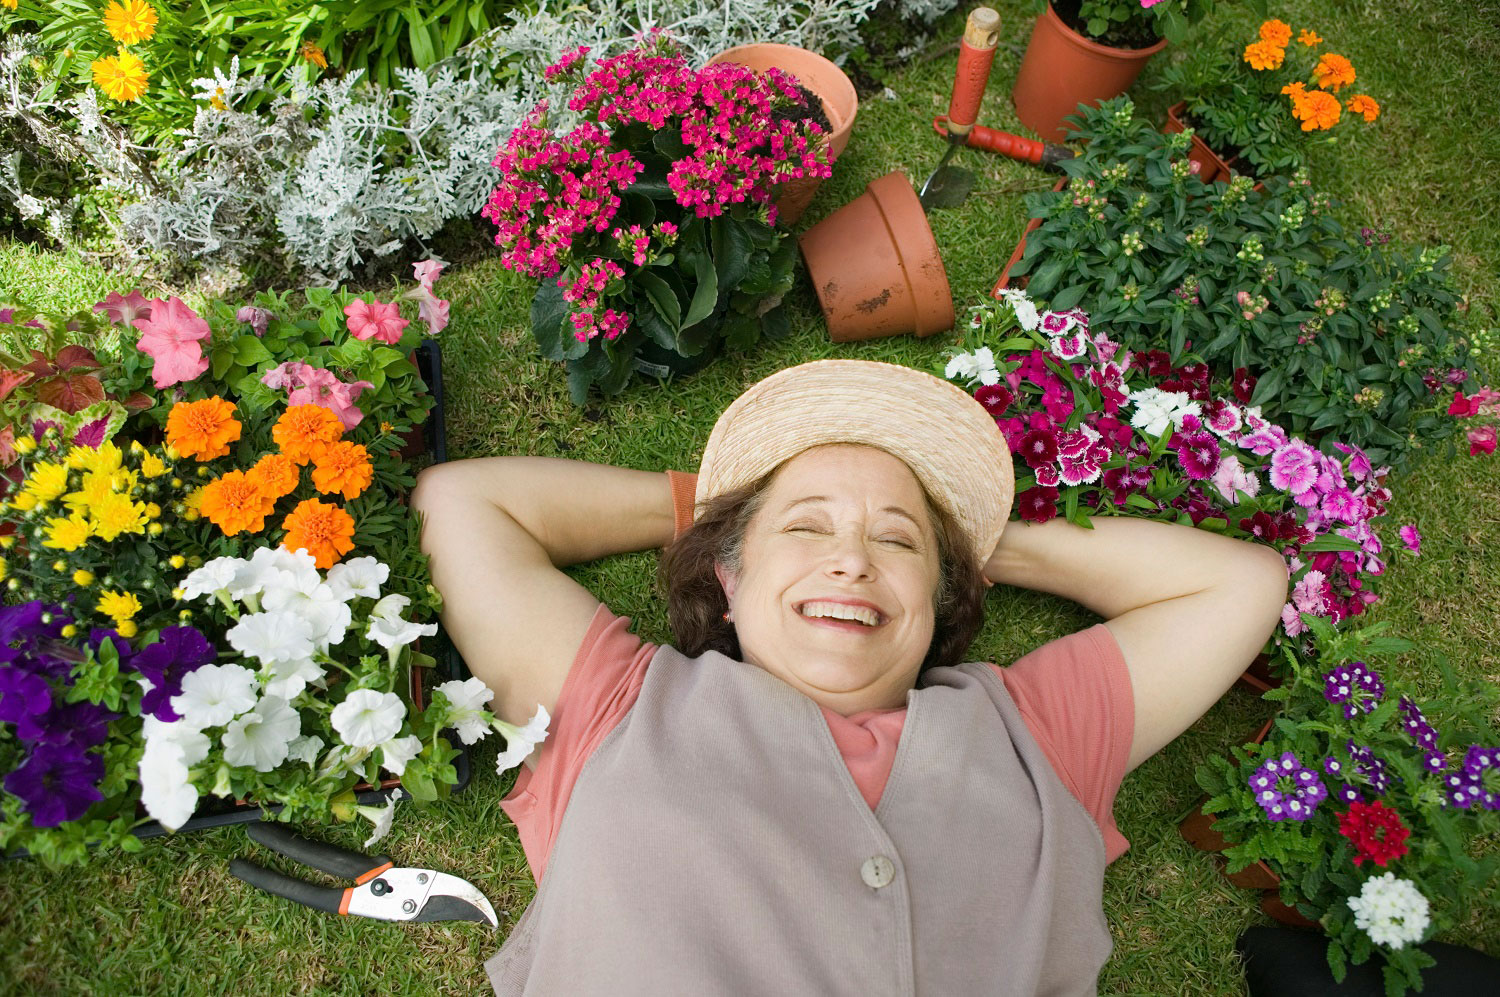 Gardening health benefits: A natural therapy for your mind and body